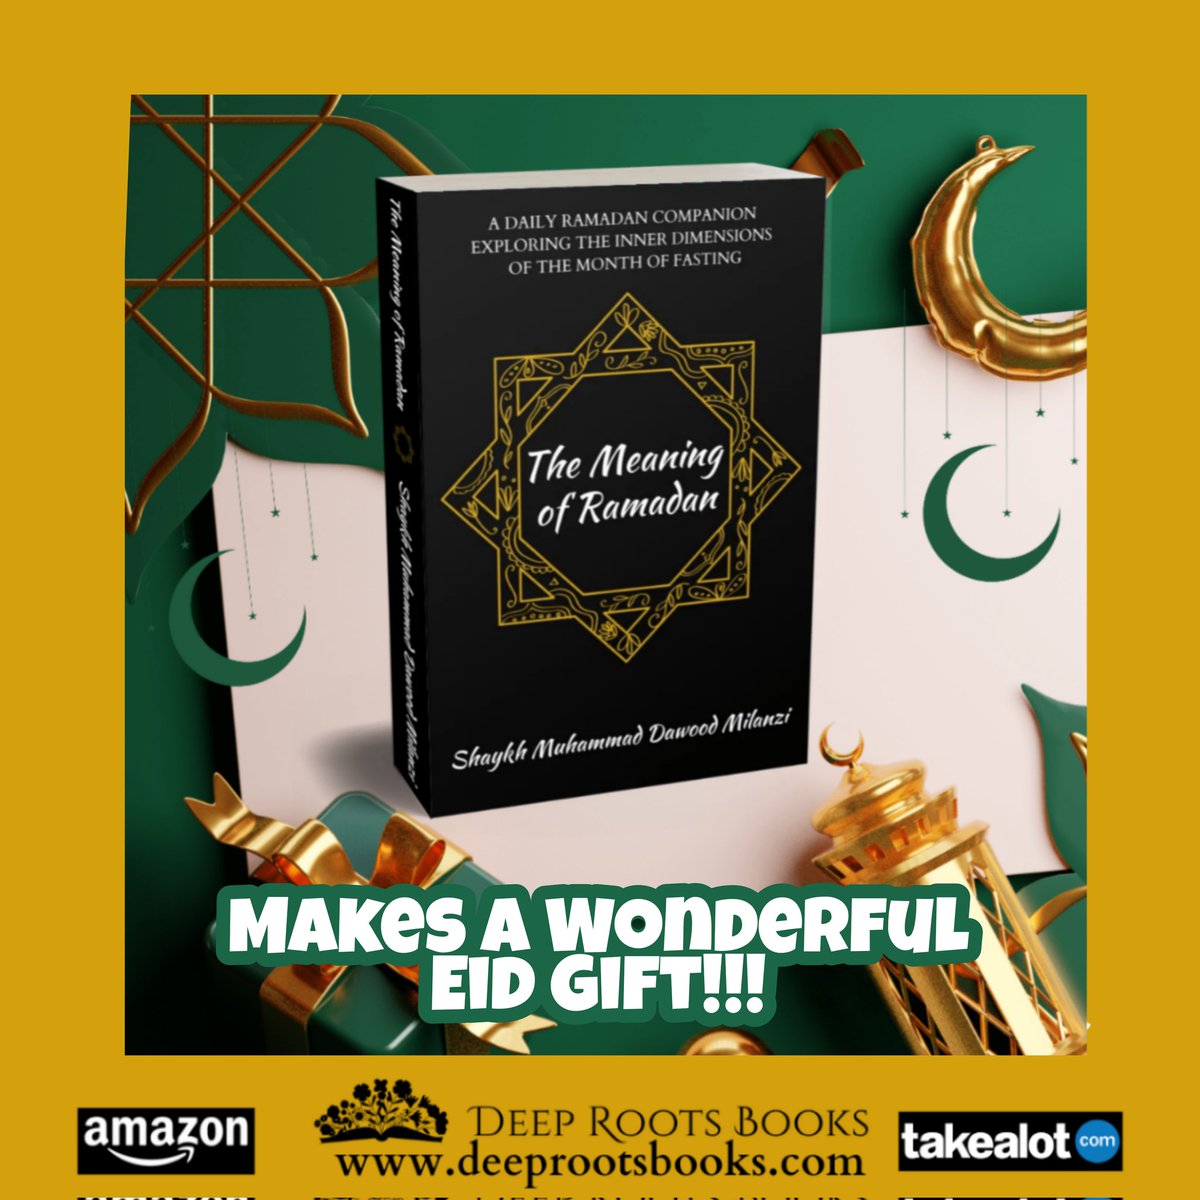 THE MEANING OF RAMADAN by Shaykh Muhammad Dawood Milanzi makes a great Eid (or anytime!) gift. Purchase links: linktr.ee/Deep.Roots.Boo…

#RamadanBook #RamadanBooks #AmazonBooks #Kindle #TakealotBooks #ReadingList #EidGift #EidGifts #MuslimGift #MuslimGifts #GiftIdea #GiftList